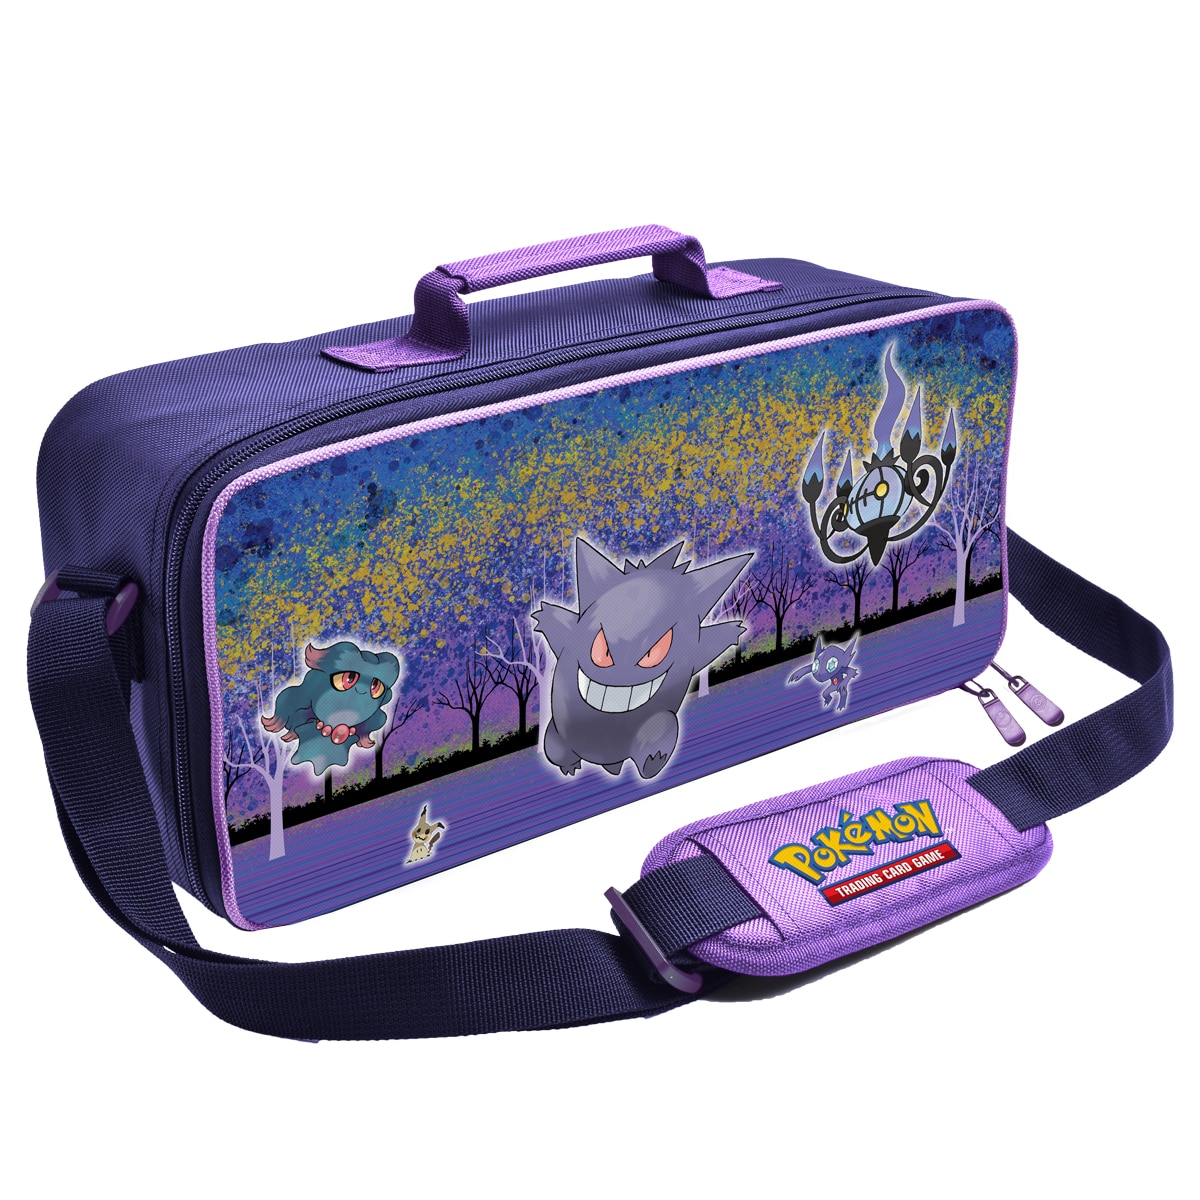 Gallery Series Haunted Hollow Deluxe Gaming Trove for Pokemon